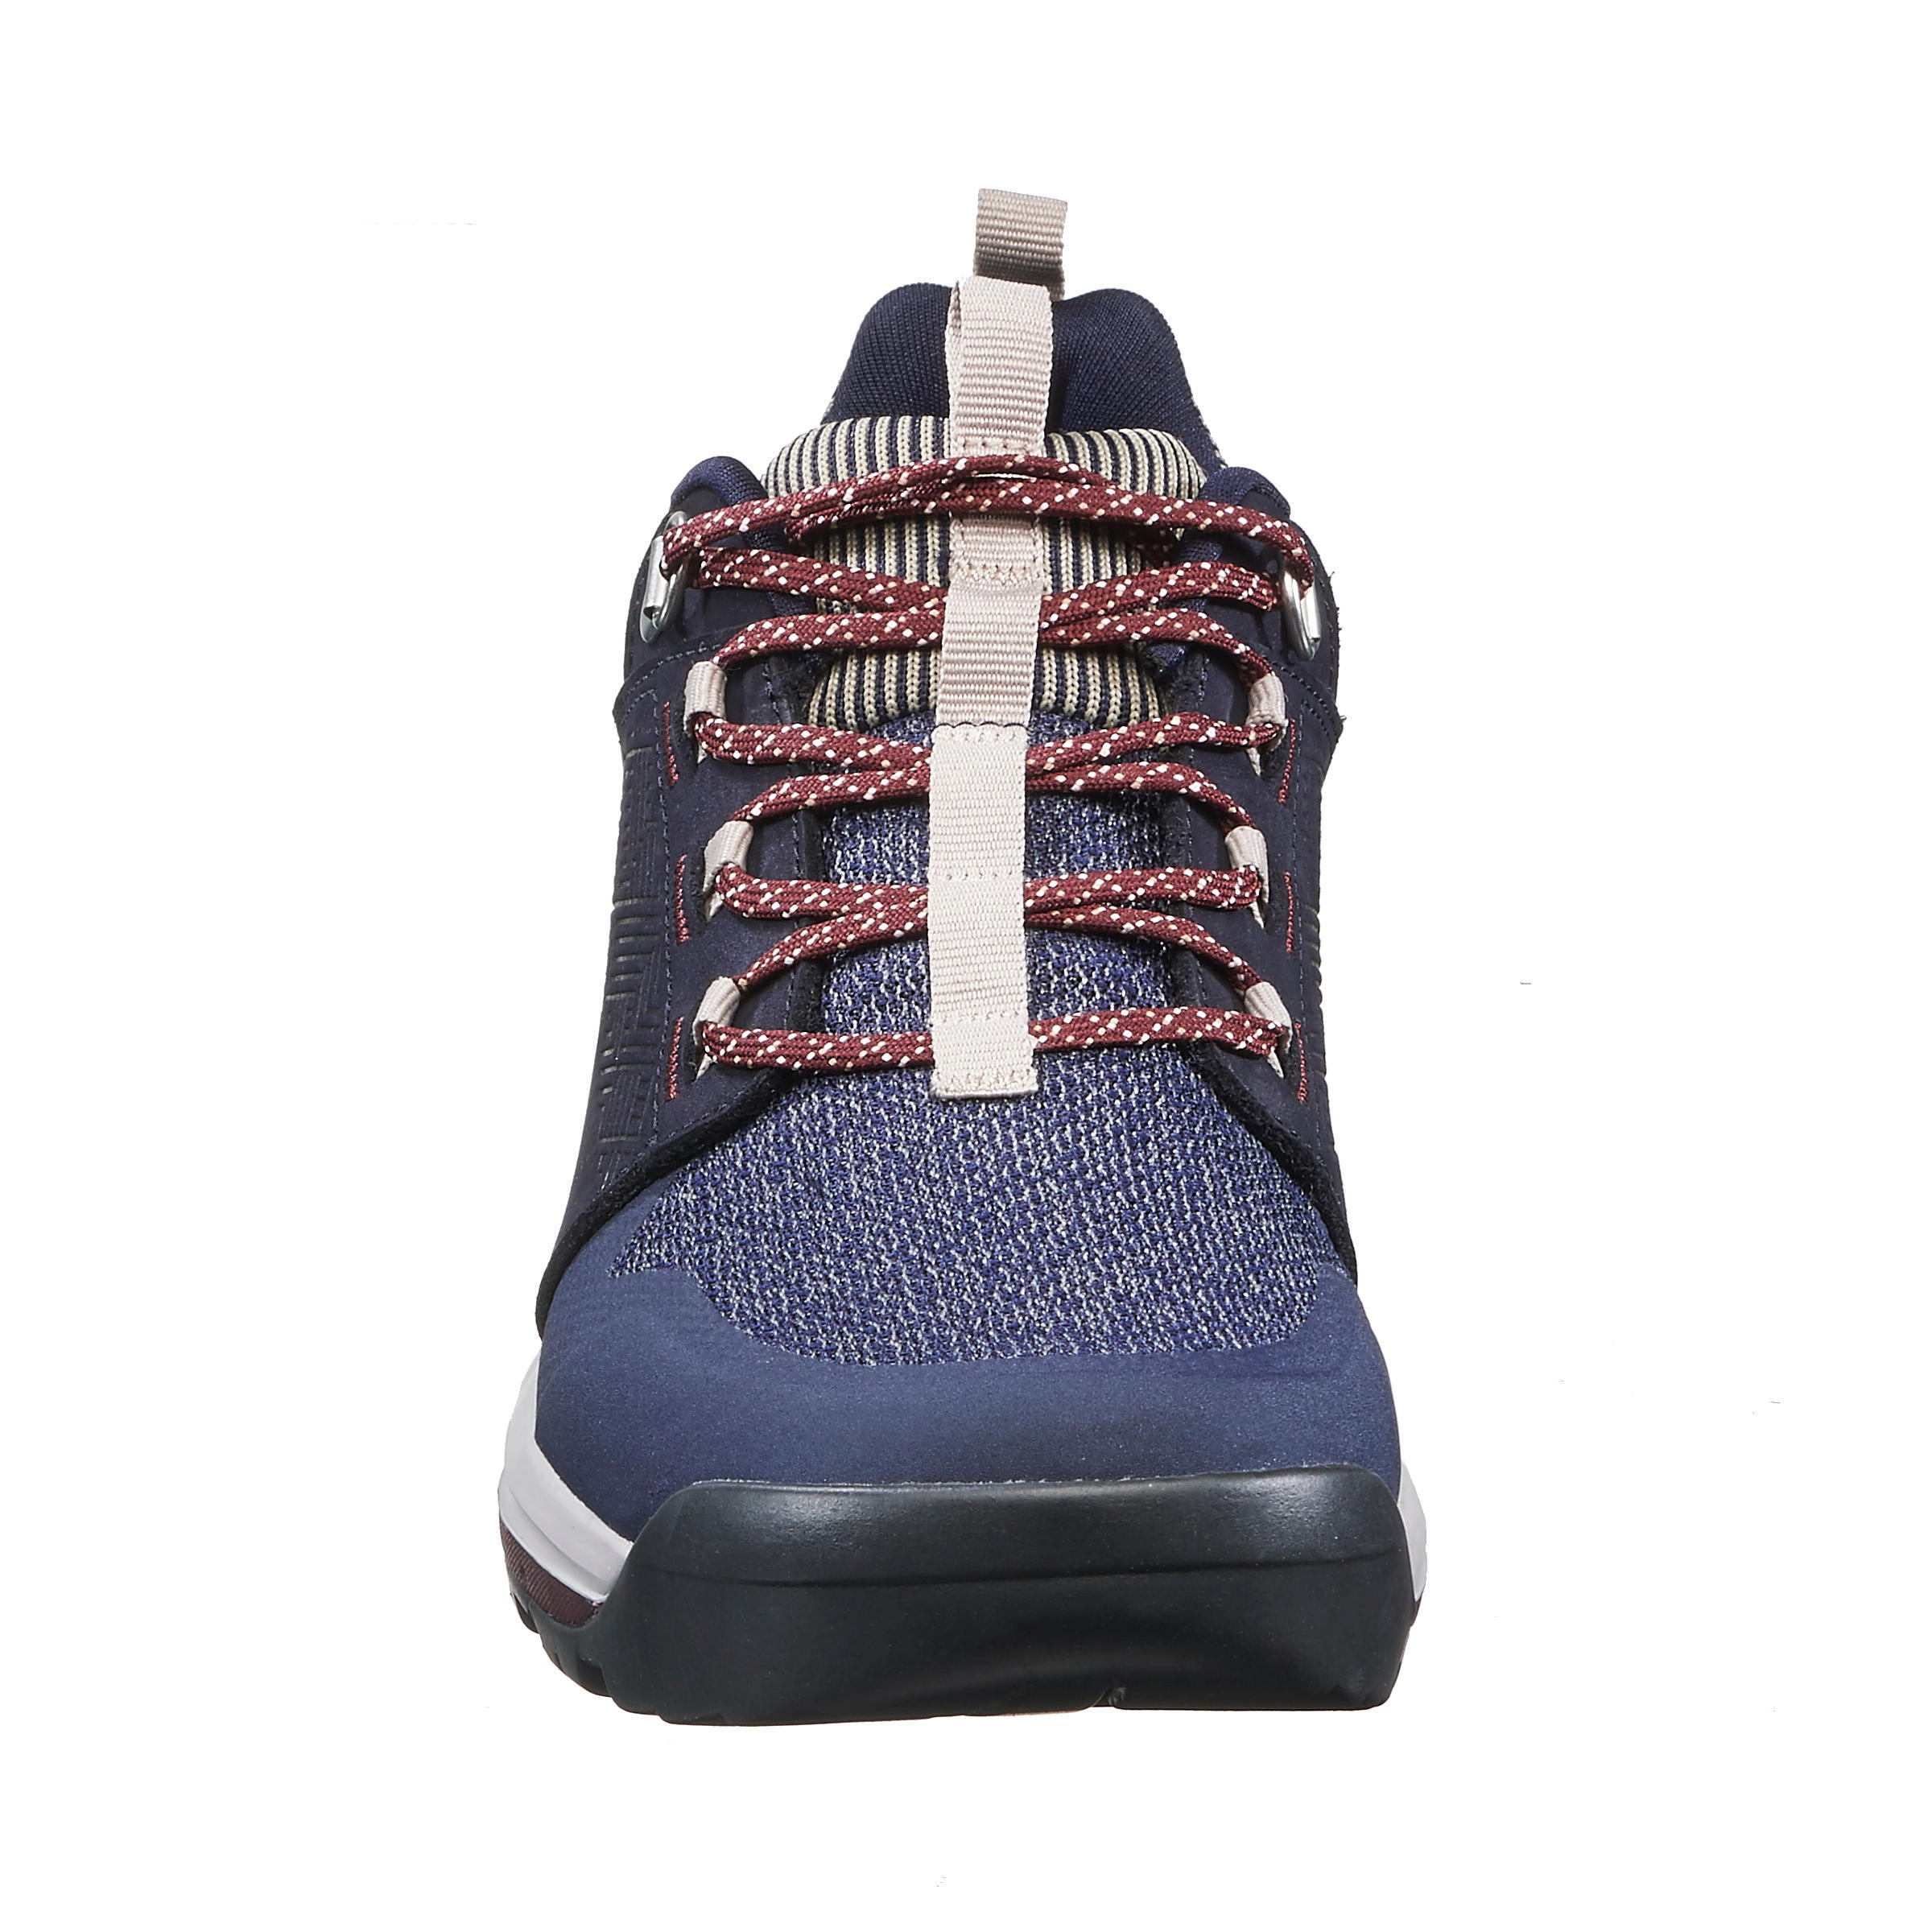 Women's Eco-Friendly Country Walking Shoes - Navy 4/9